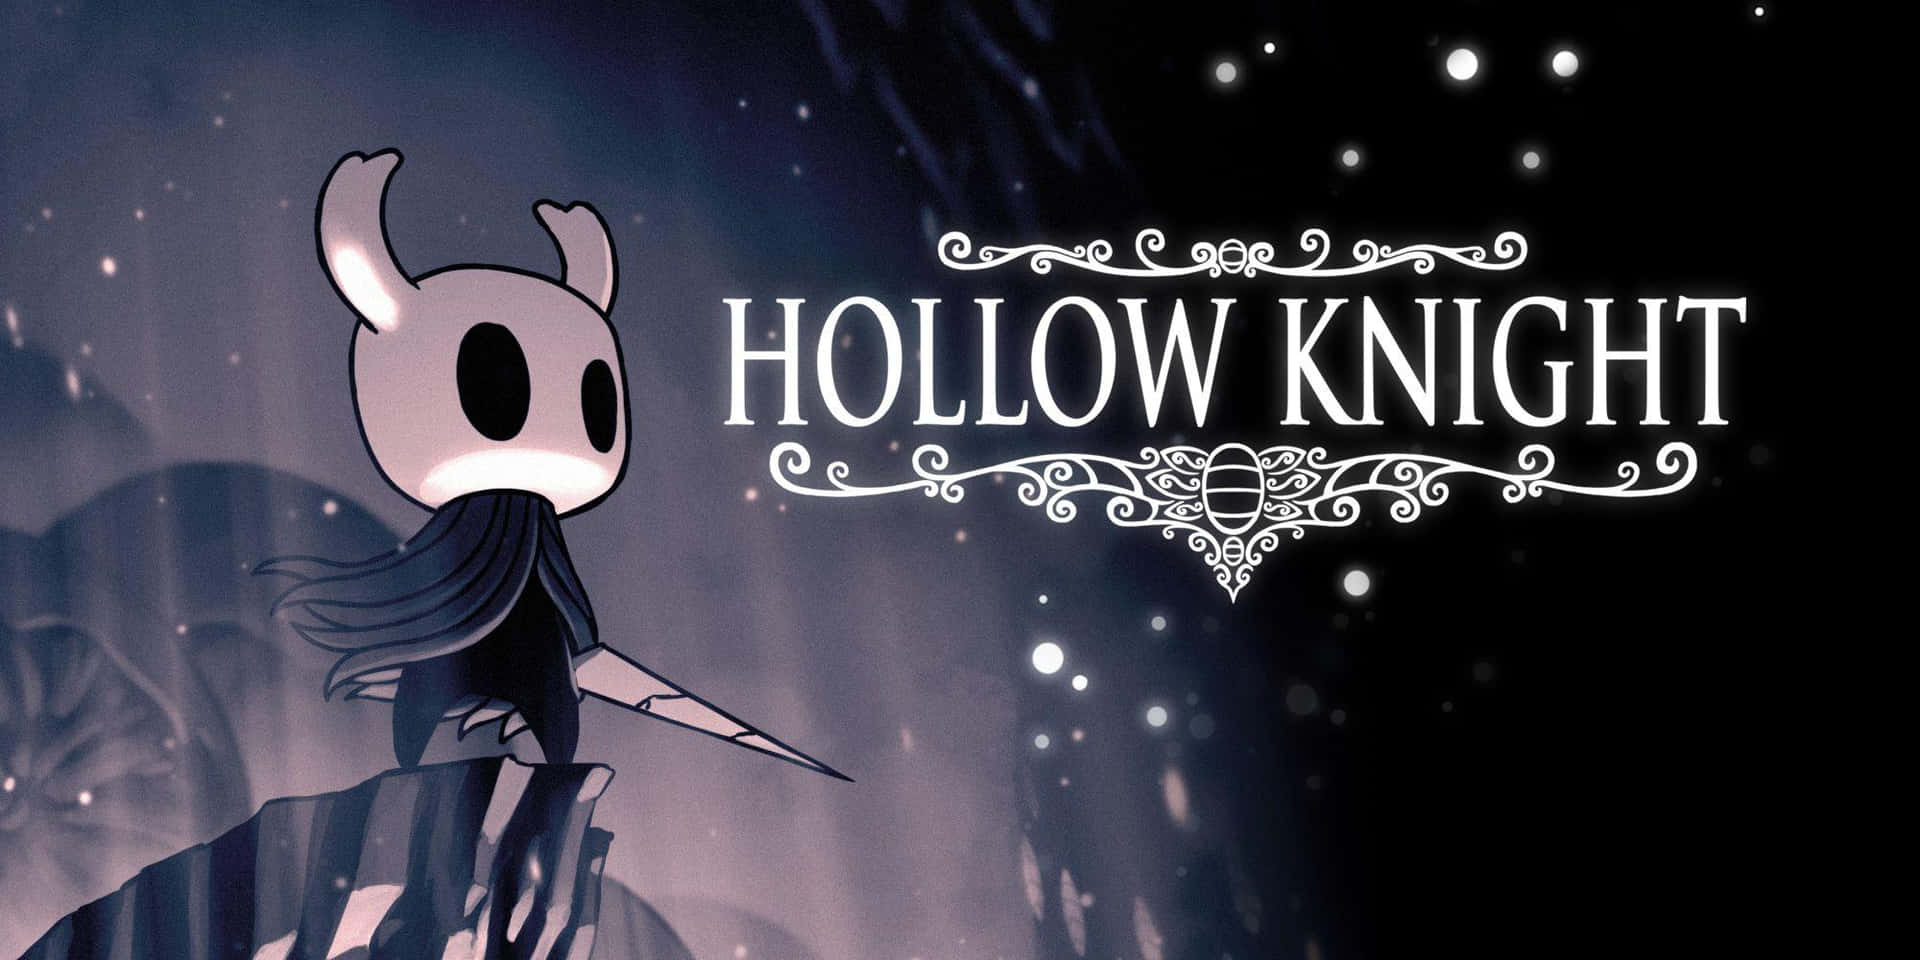 The protagonist of Hollow Knight battles for what he believes in